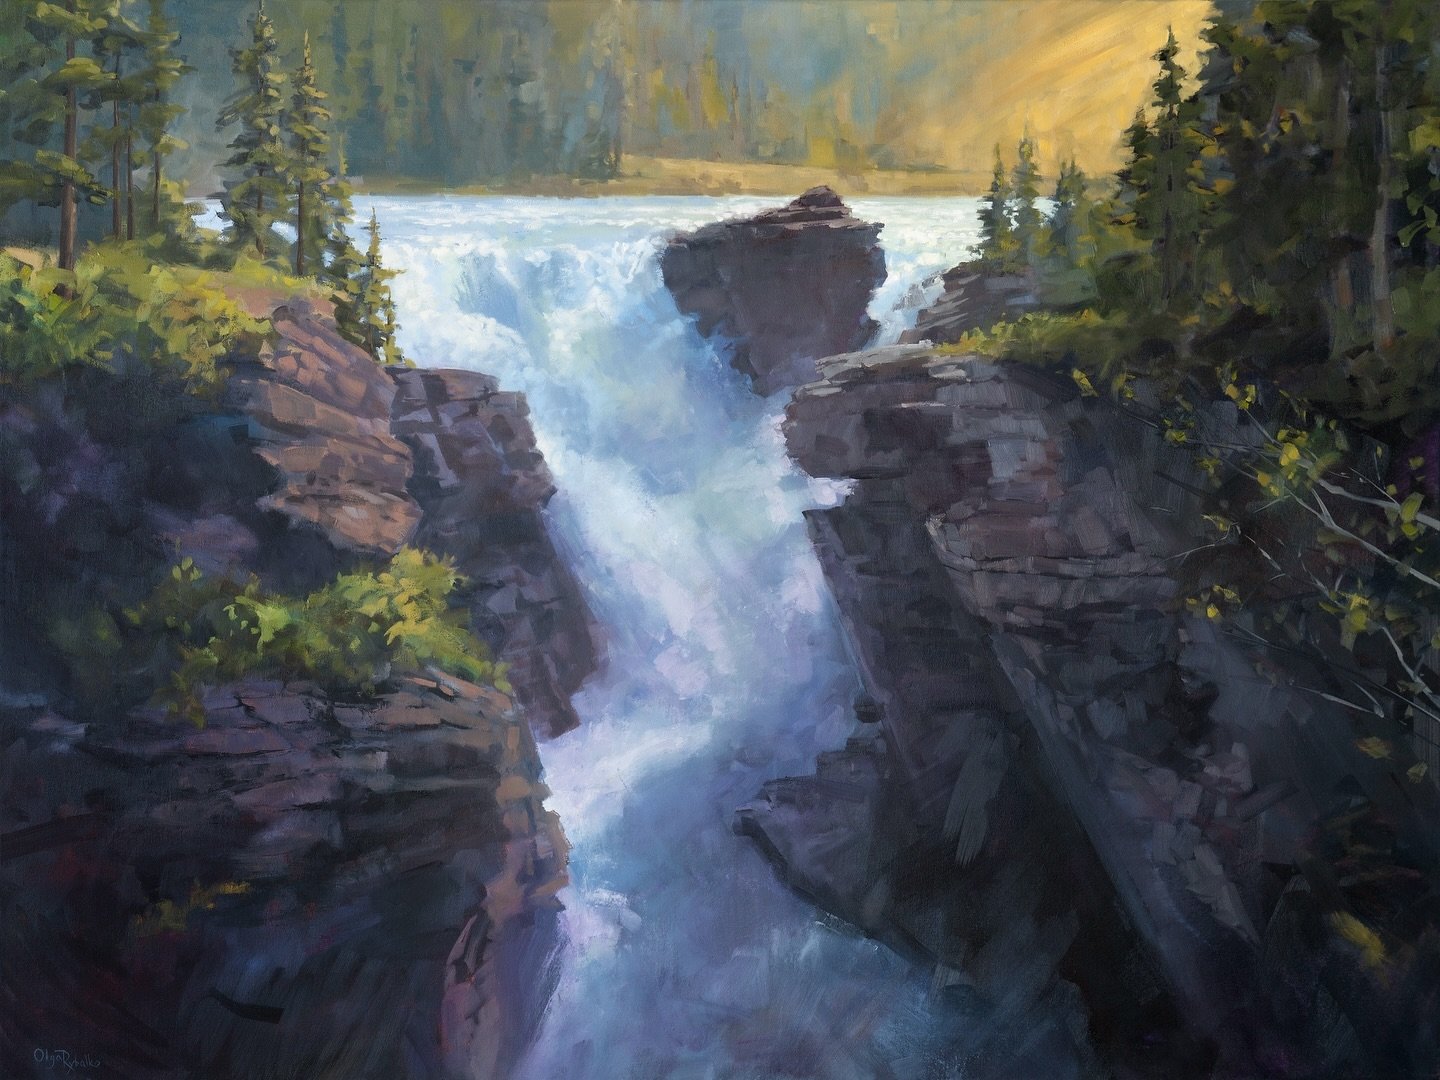 Here&rsquo;s a little escape to nature on canvas 🖼️ 
&ldquo;Athabasca&rsquo;s Grace&rdquo;, 30&rdquo;x40&rdquo;, oil on canvas

#albertacanada #athabascafalls #OilPaintings